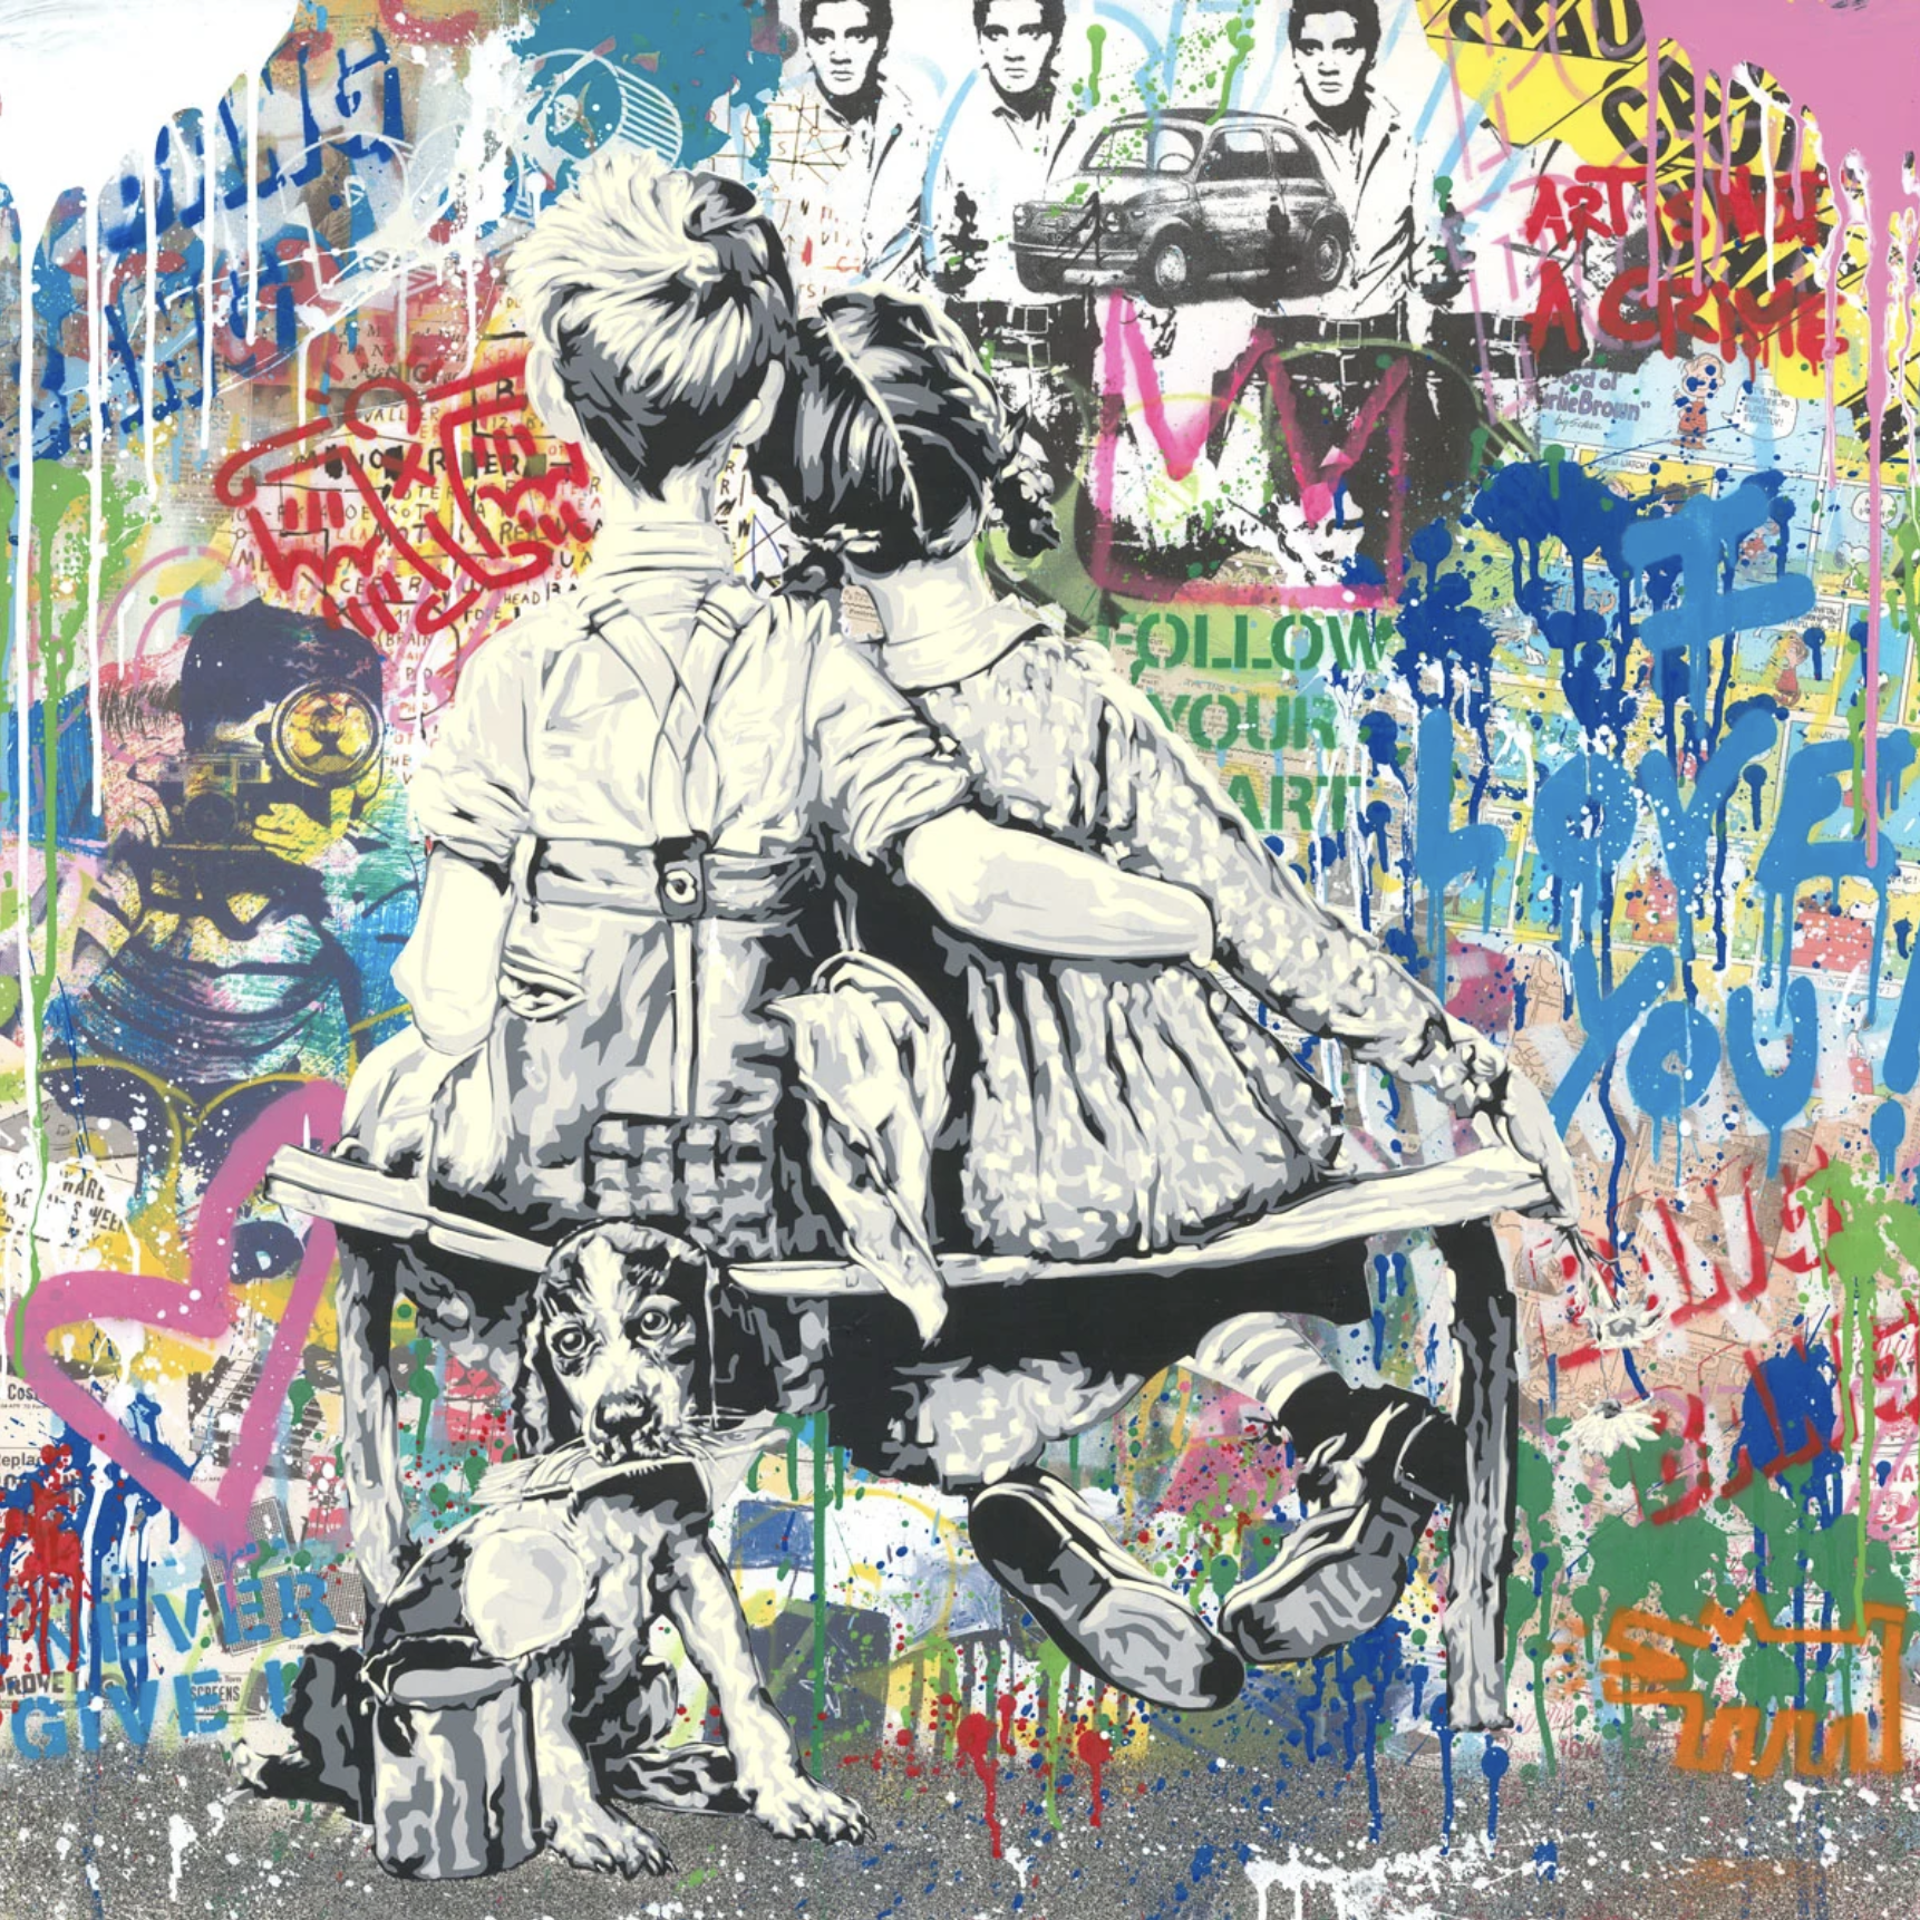 Works Well Together by Mr Brainwash